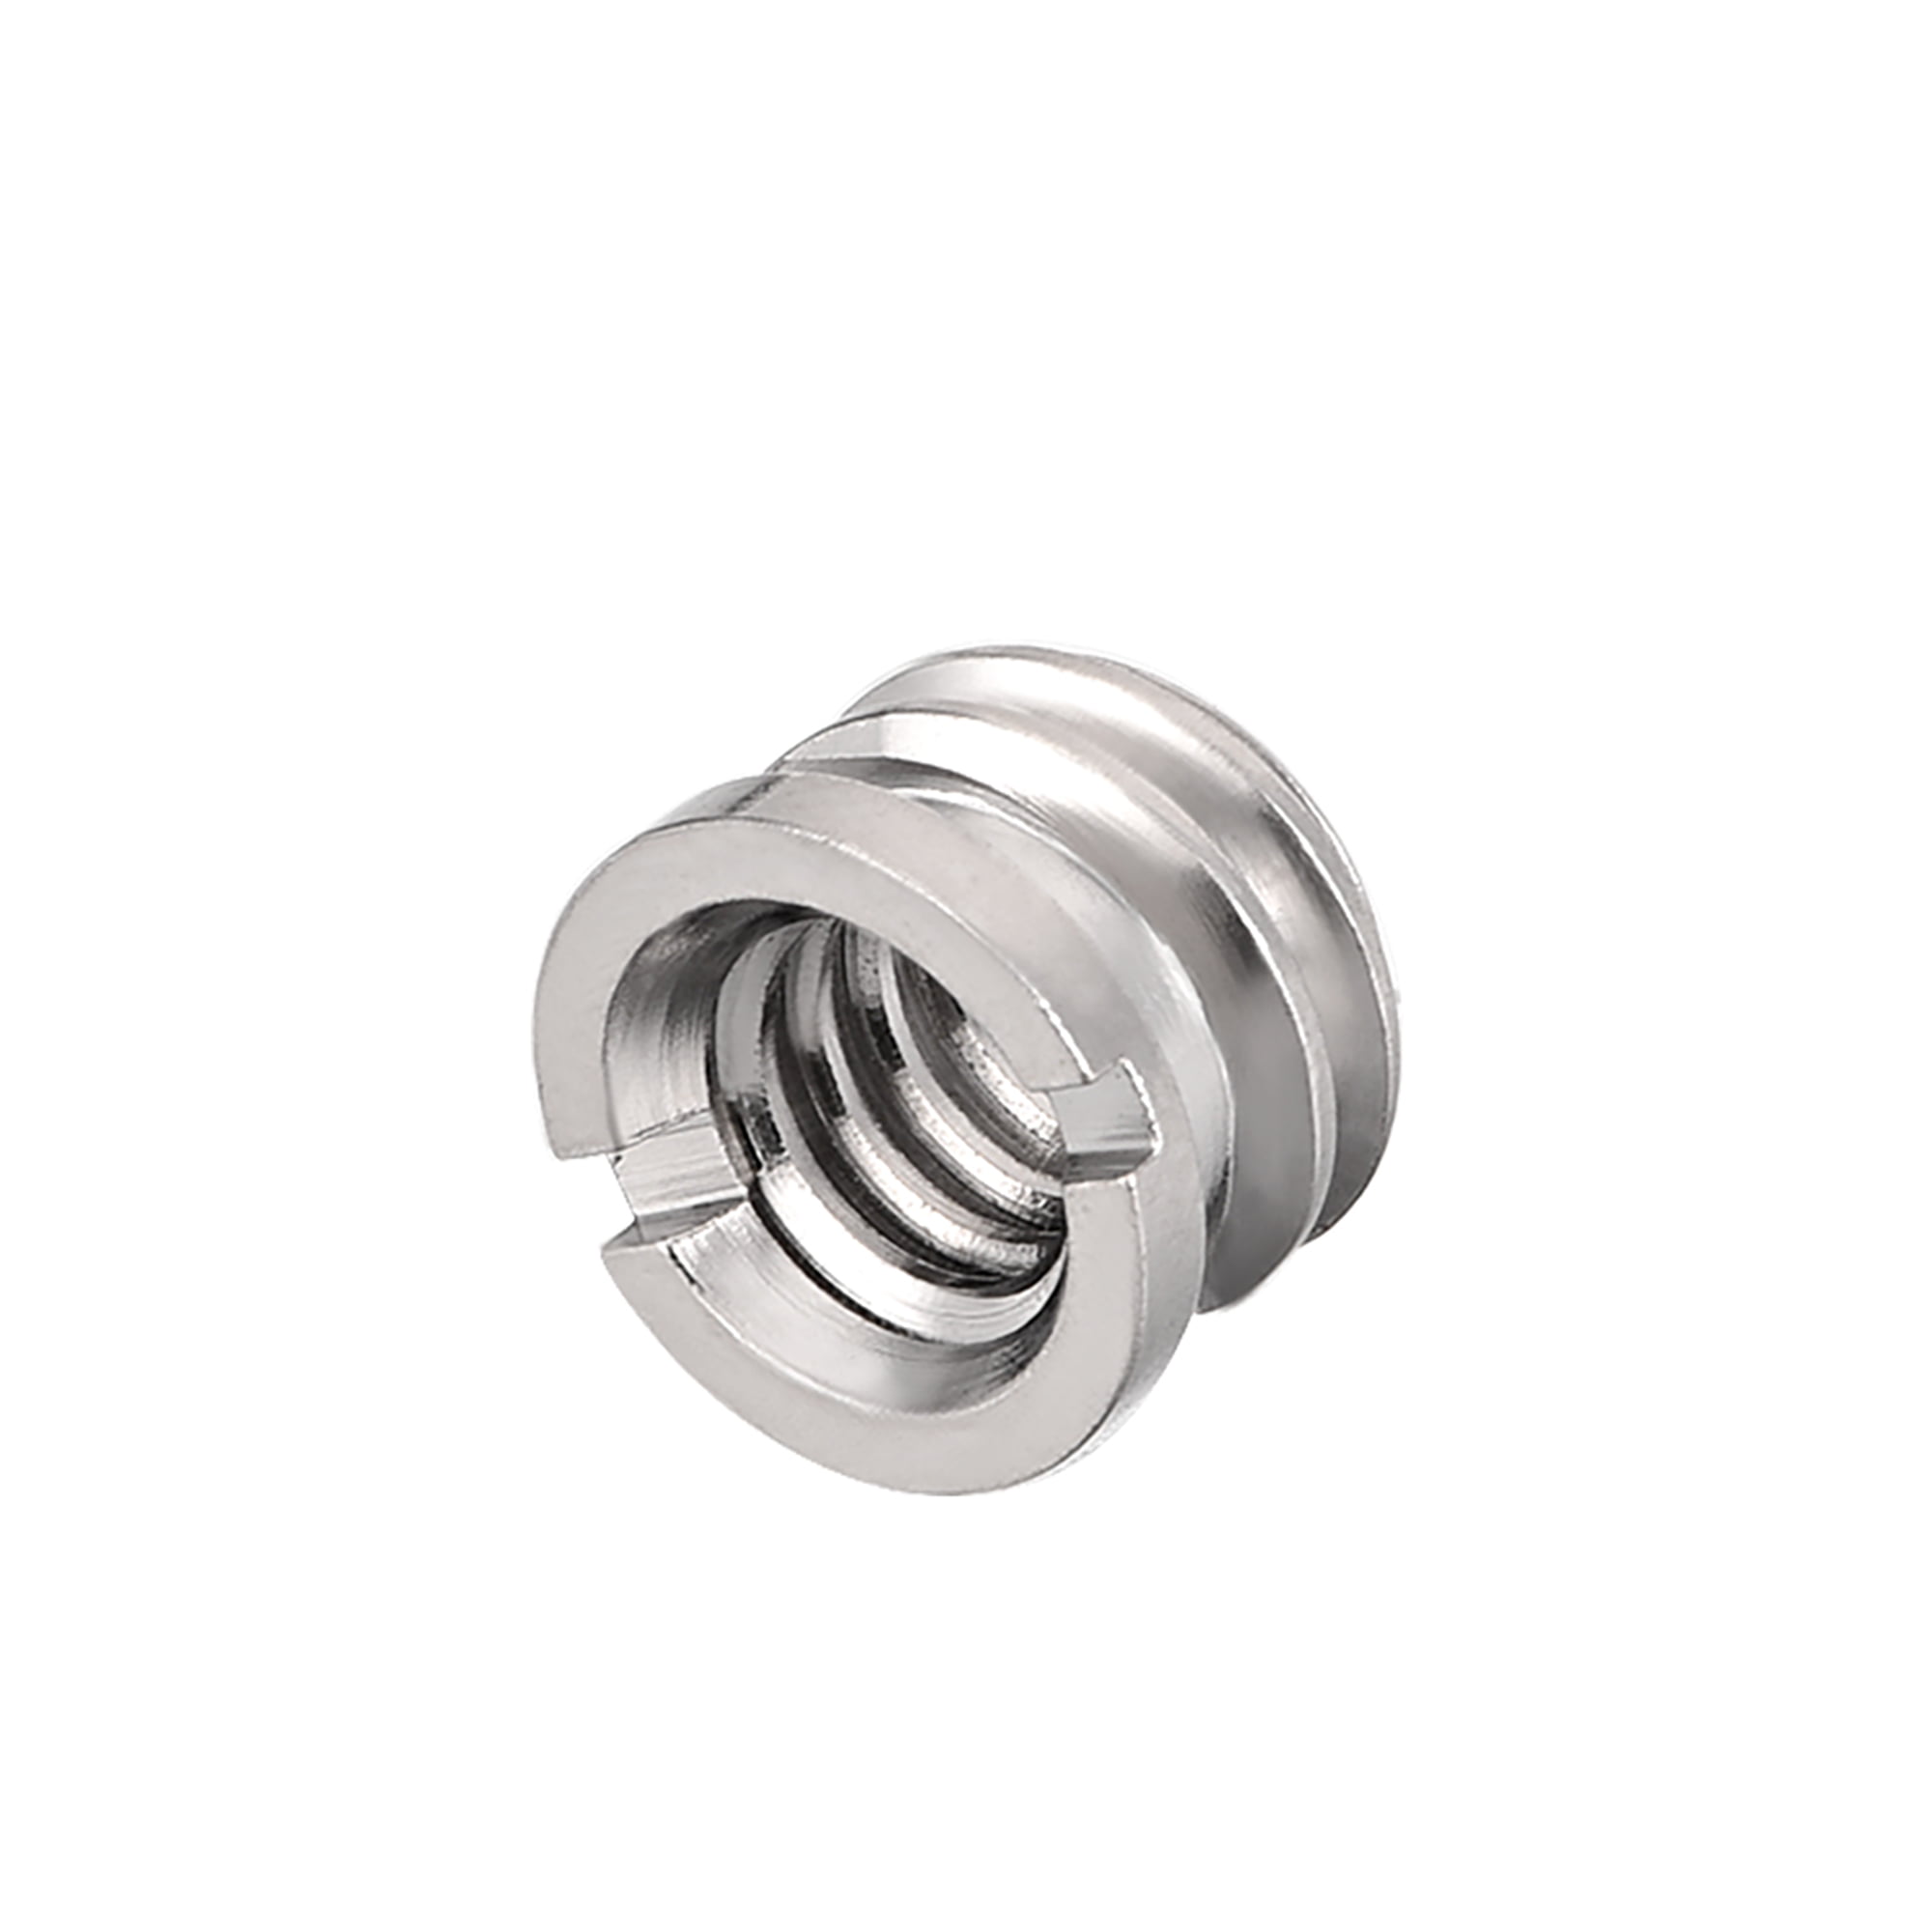 Pack of 1 Lyn-Tron 1/4-20 Screw Size 8.5 Length, 0.625 OD Stainless Steel Female 